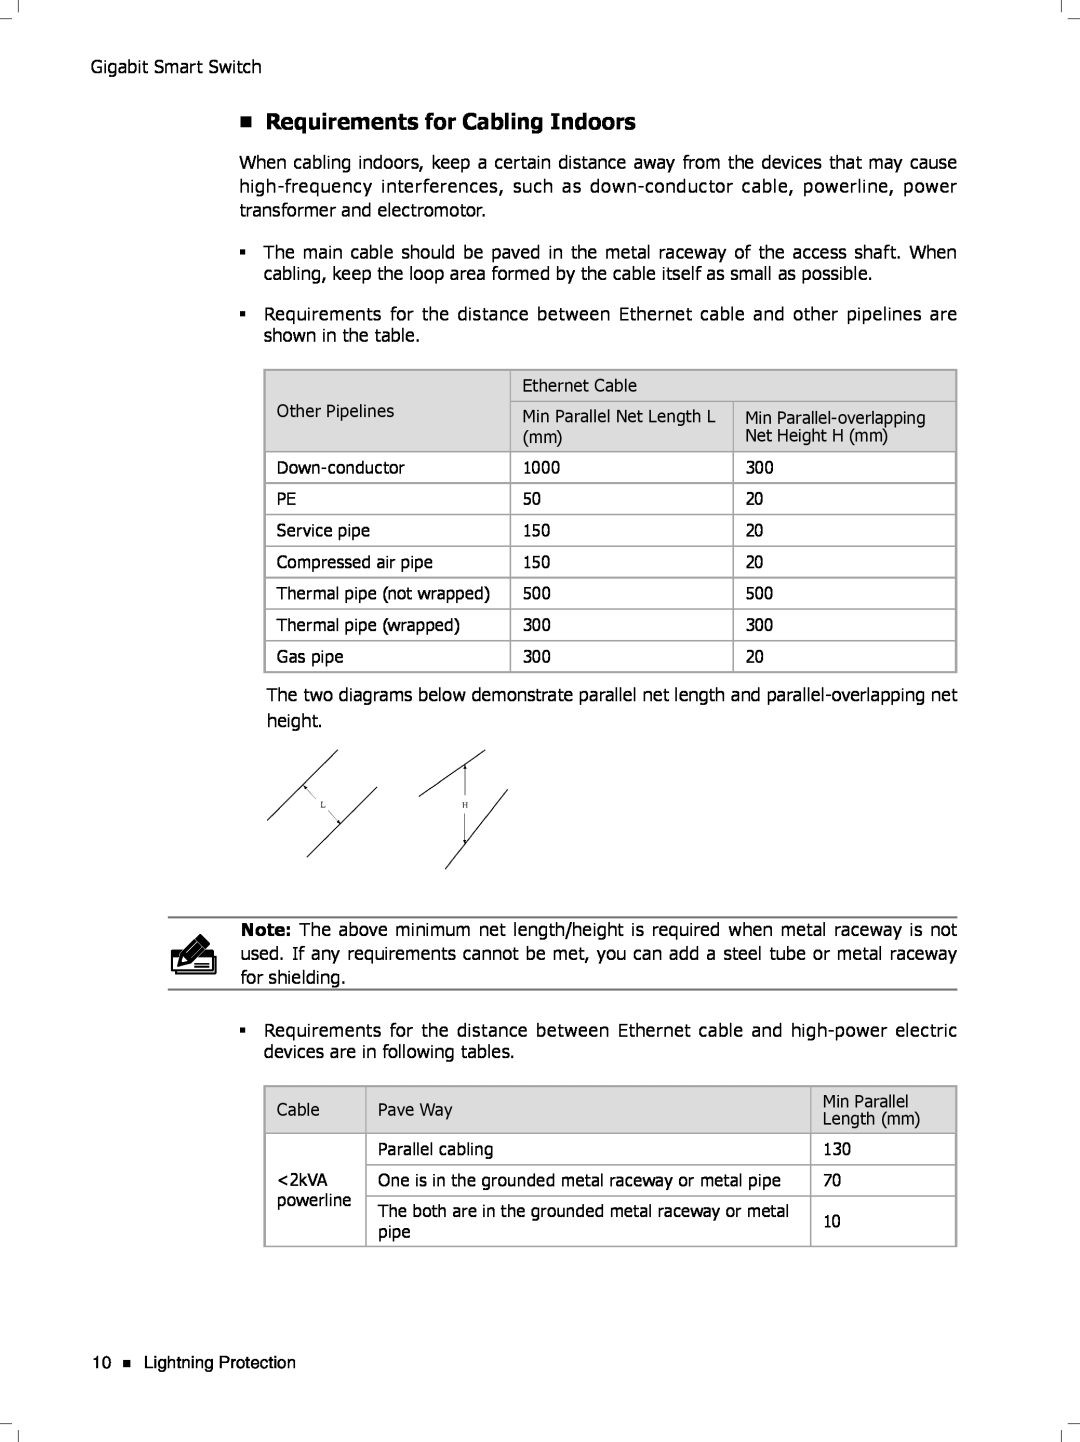 TP-Link TL-SG2424, TL-SG2216 manual Requirements for Cabling Indoors, Lightning Protection 